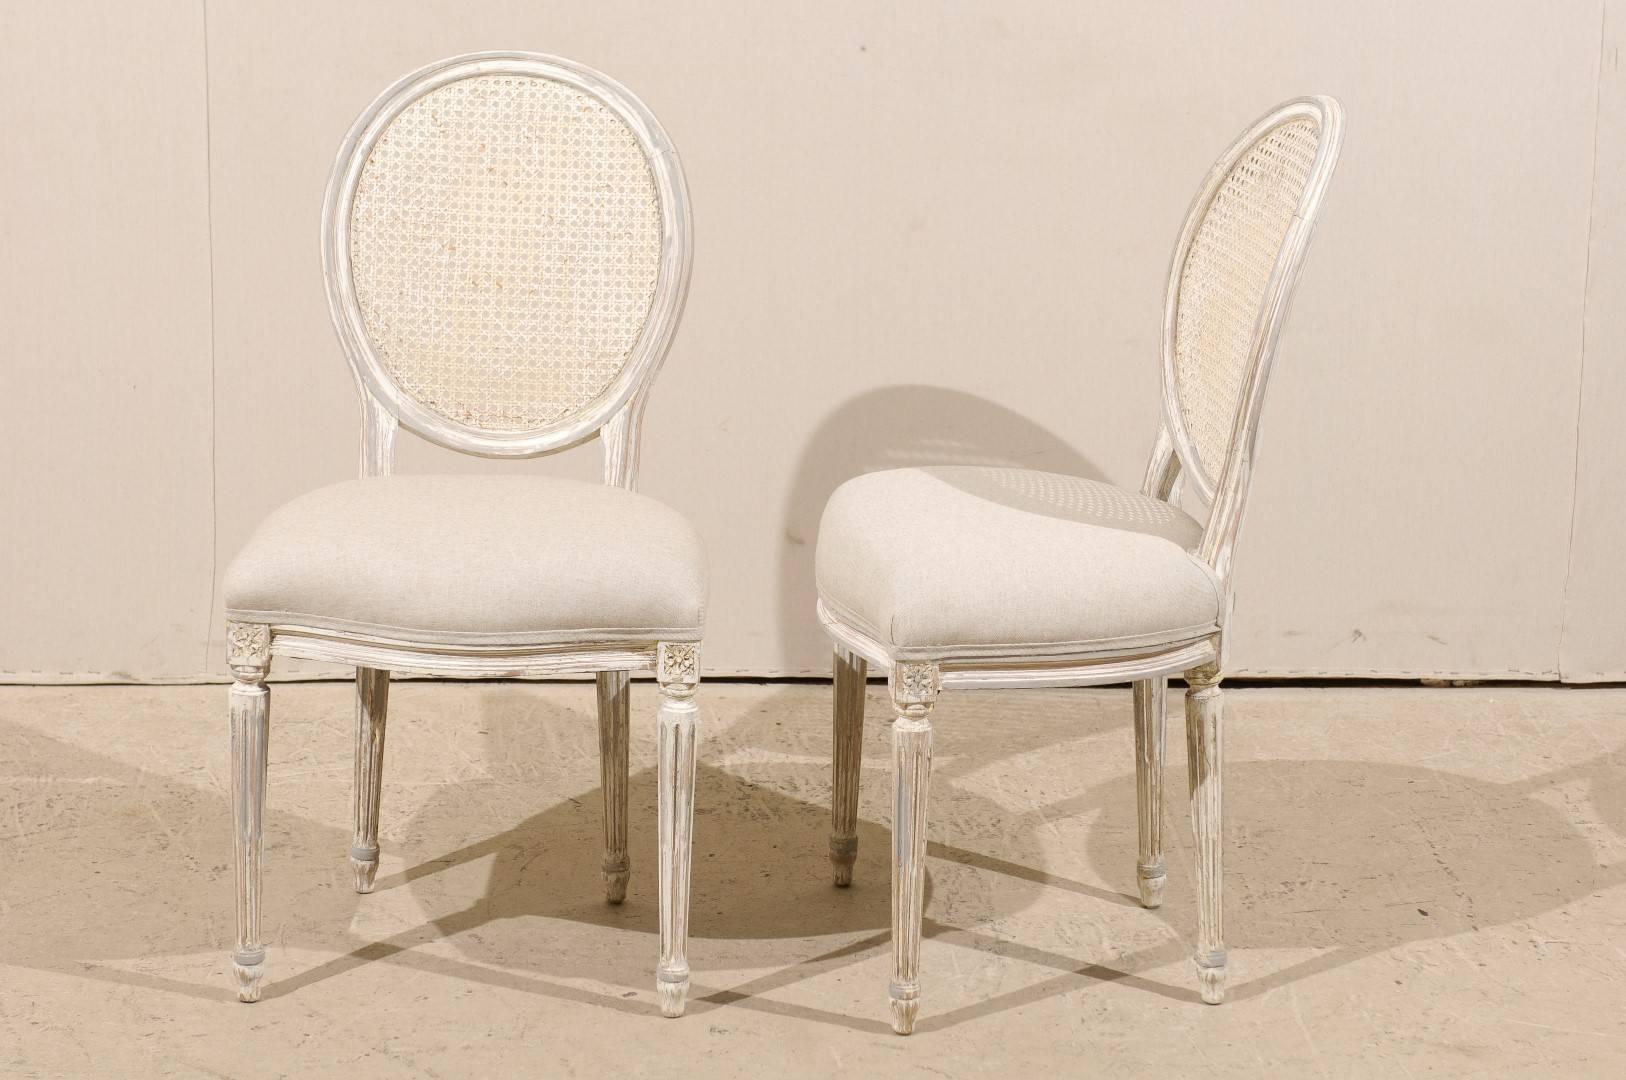 American Pair of Louis XVI Style Oval Cane Back Chairs with Fluted Leg